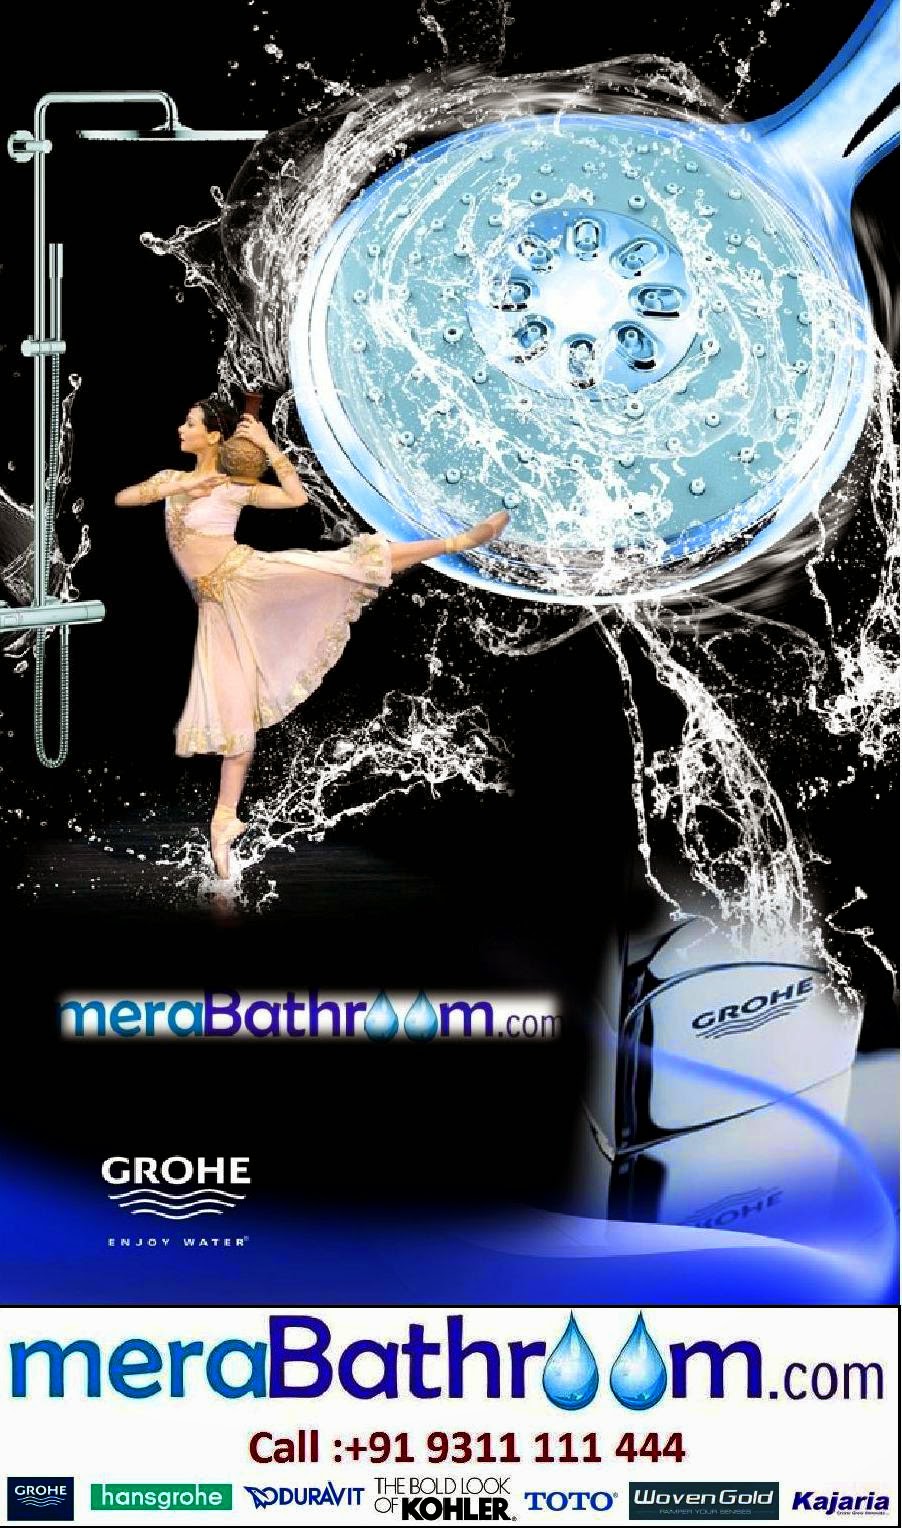  Grohe Bathroom Products